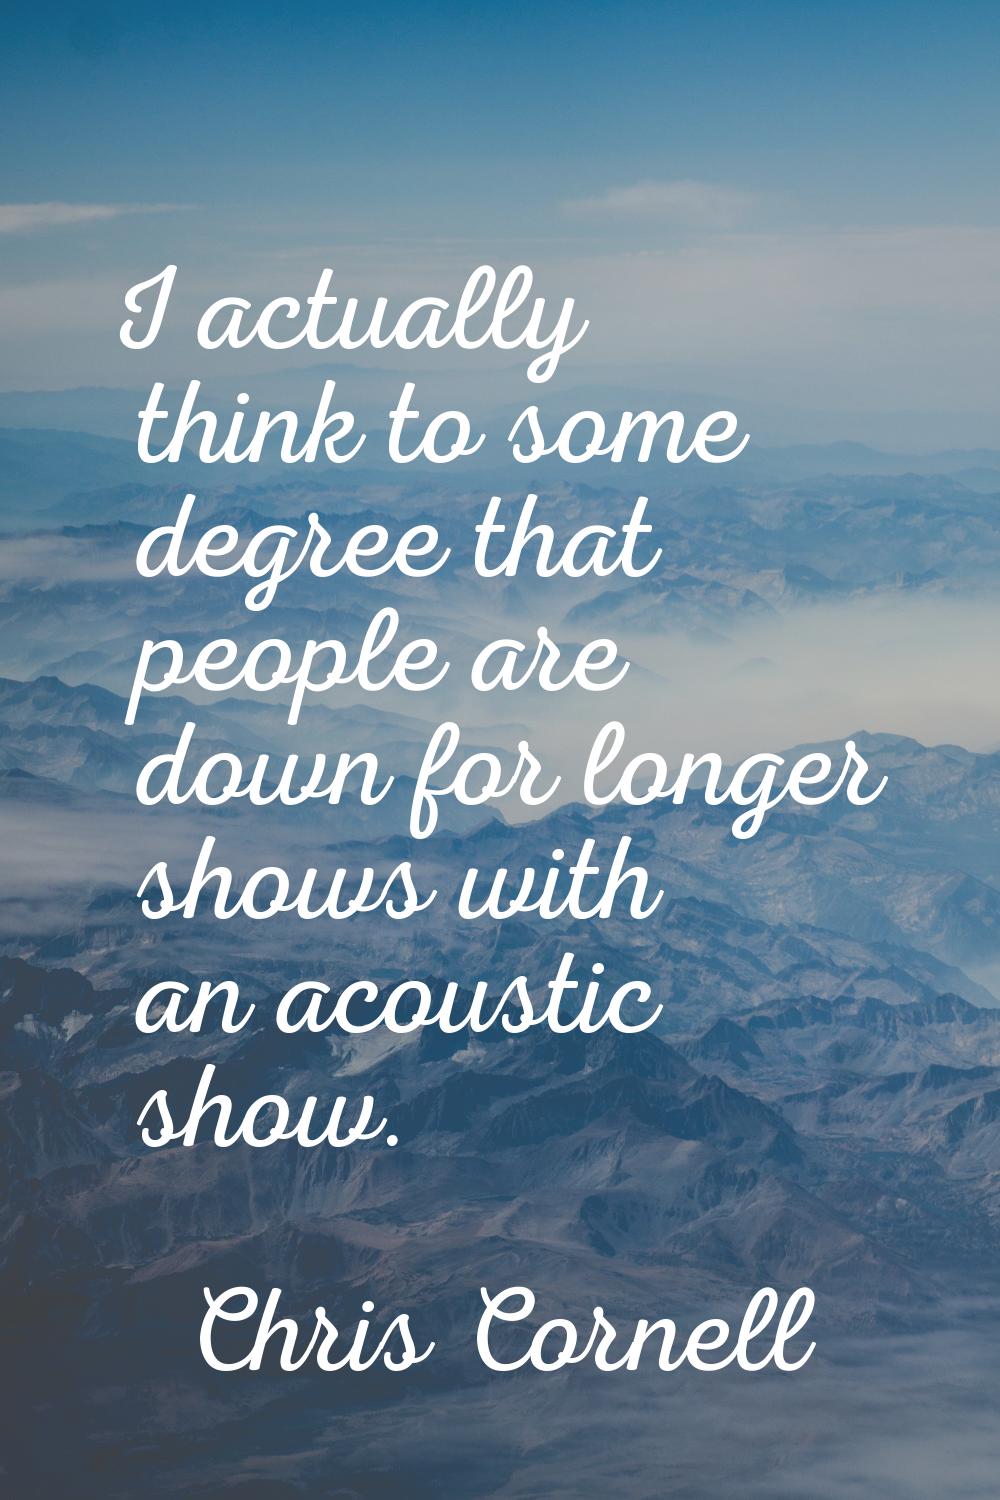 I actually think to some degree that people are down for longer shows with an acoustic show.